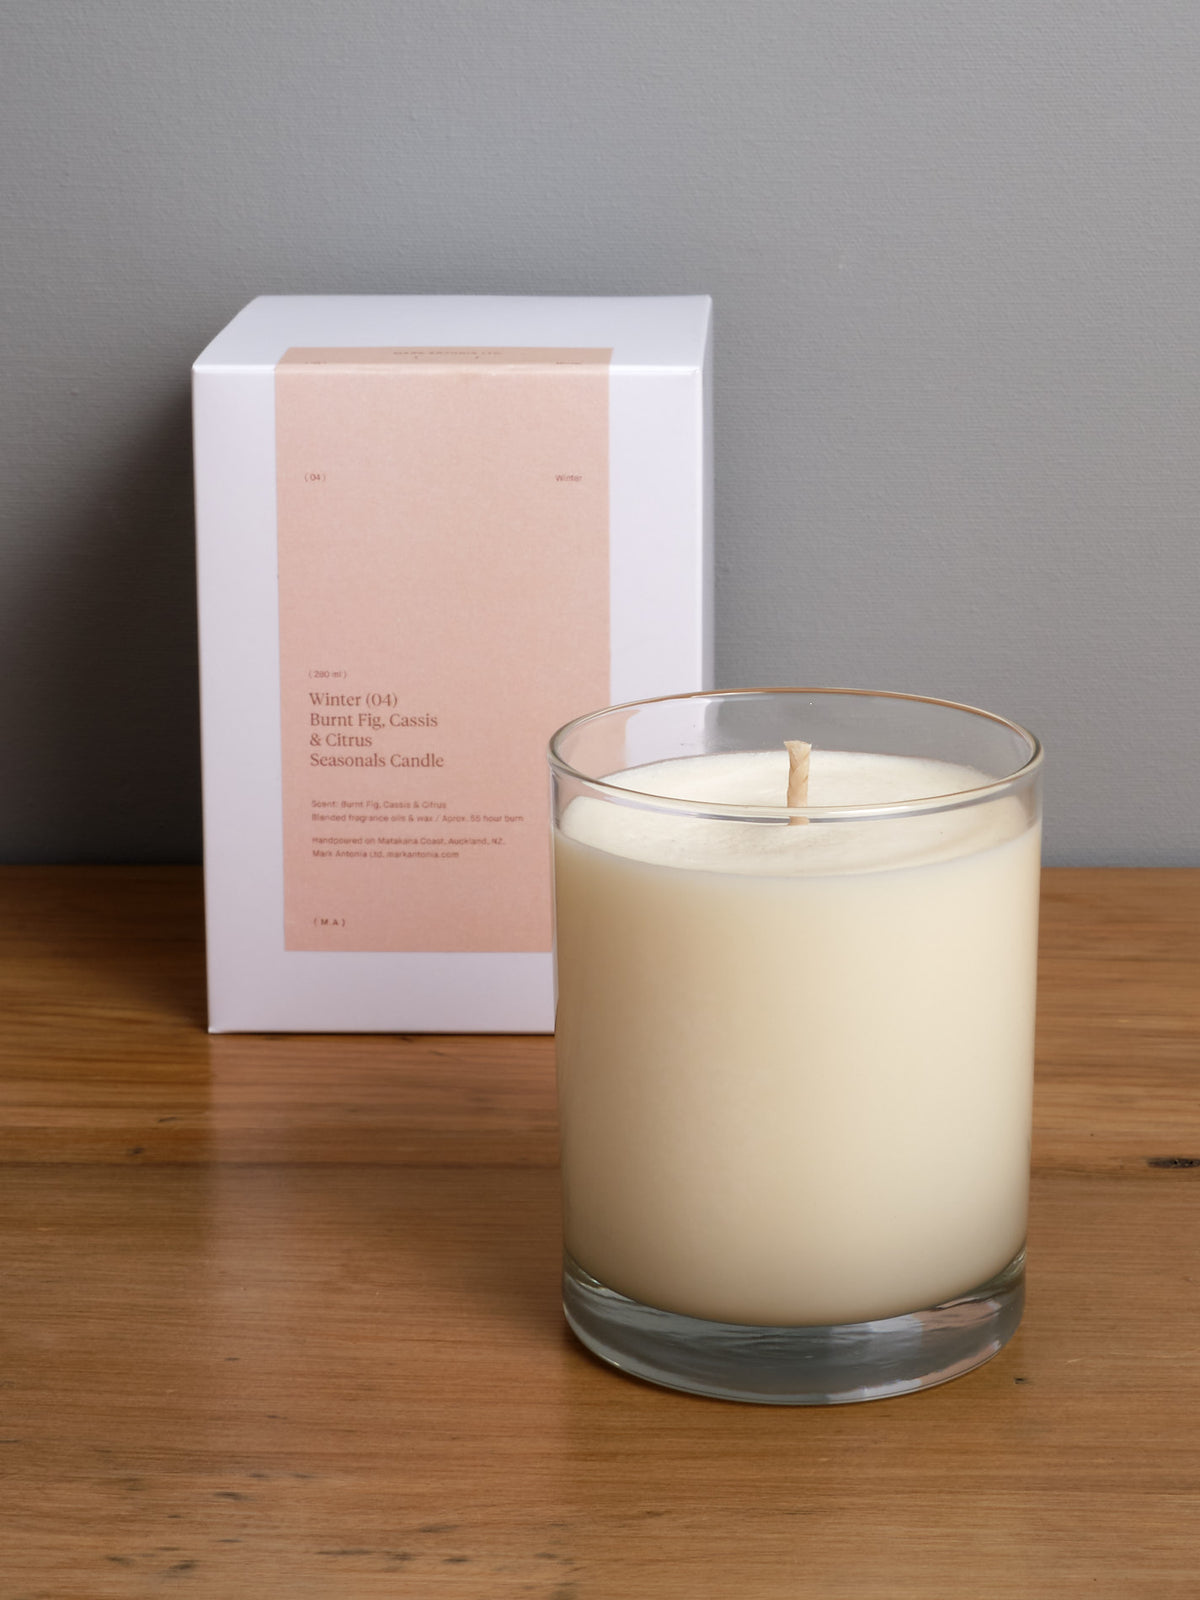 A Mark Antonia Seasonal Candle (2.0) – Winter sitting on a wooden table next to a box.